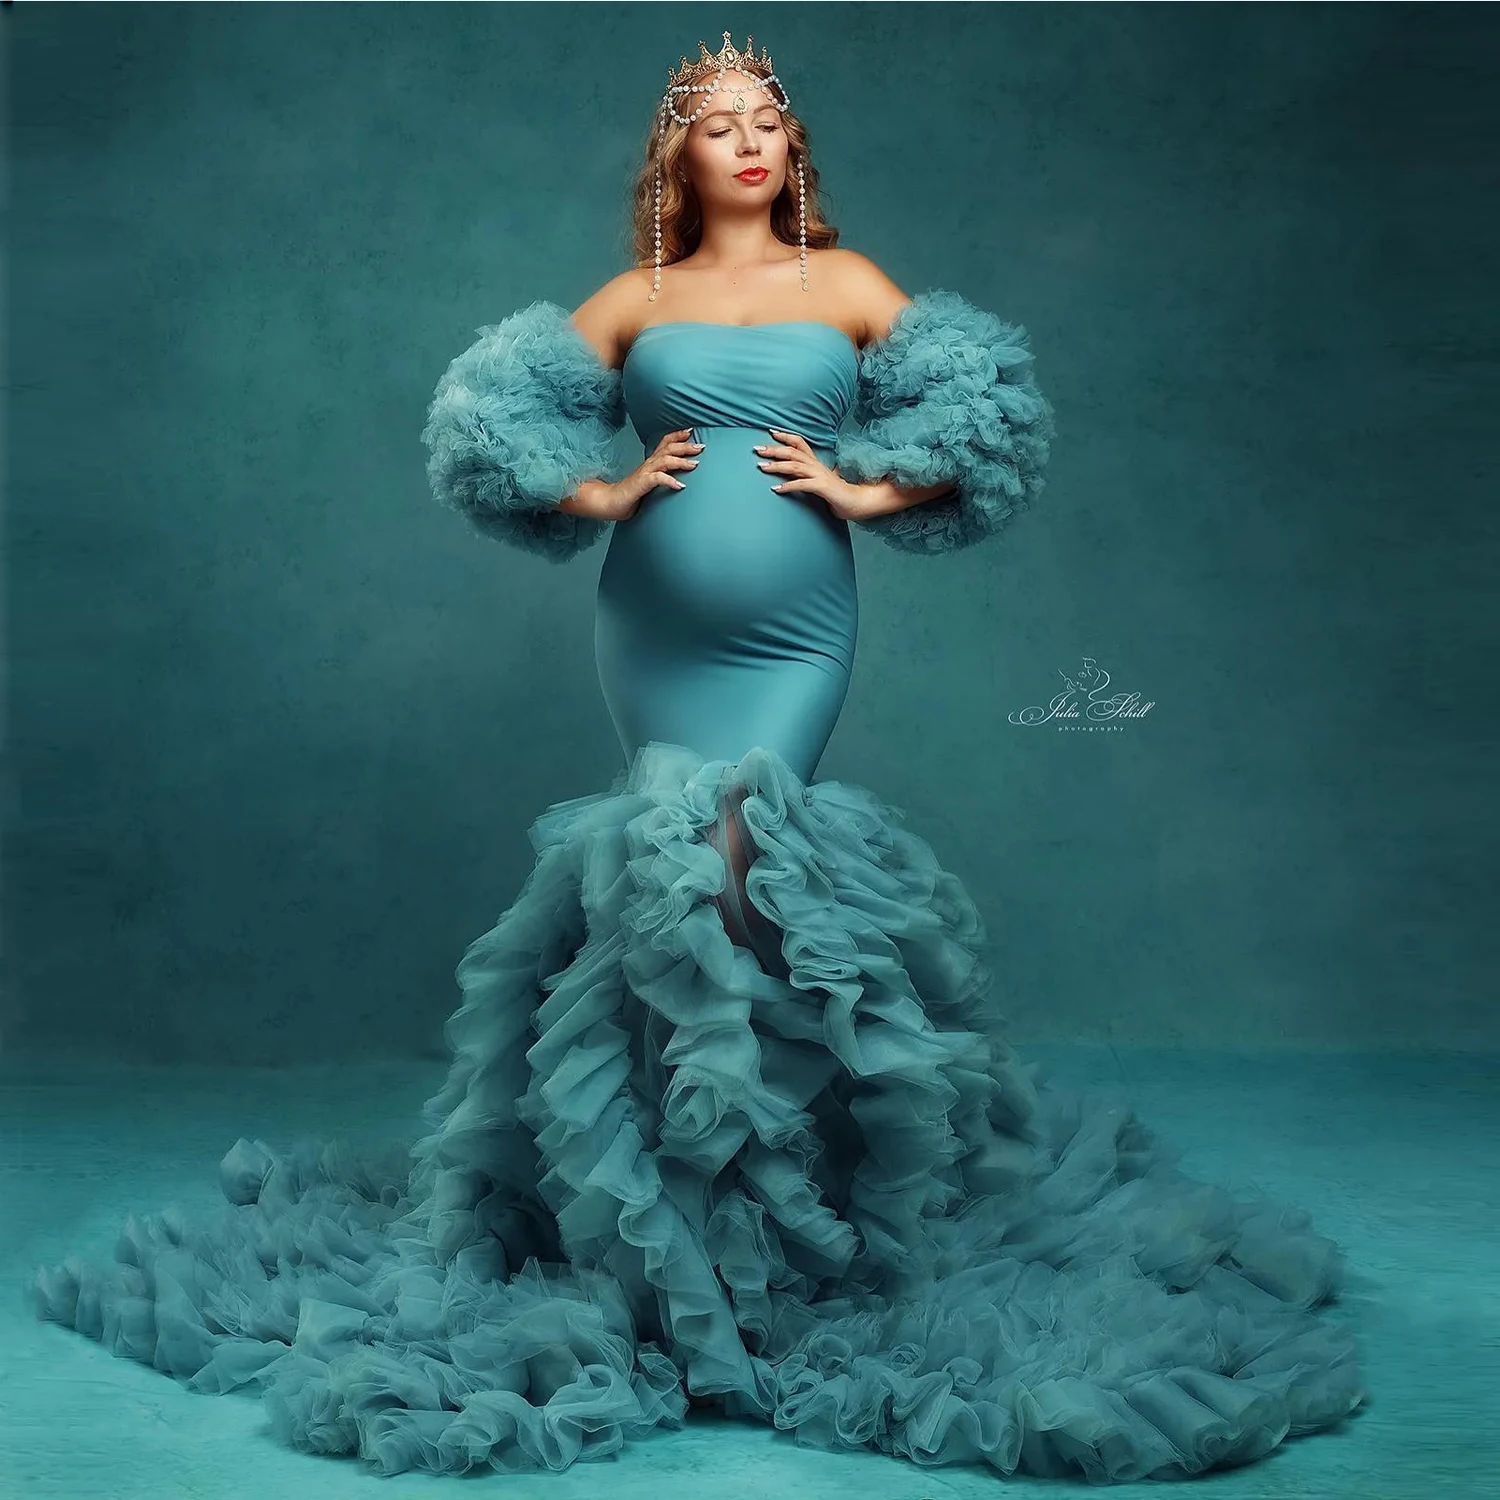 

Teal Blue Mermaid Maternity Dress for Pregnant Woman Removable Puffy Sleeve Ruffled Tulle Maternity Photography Dress Photoshoot